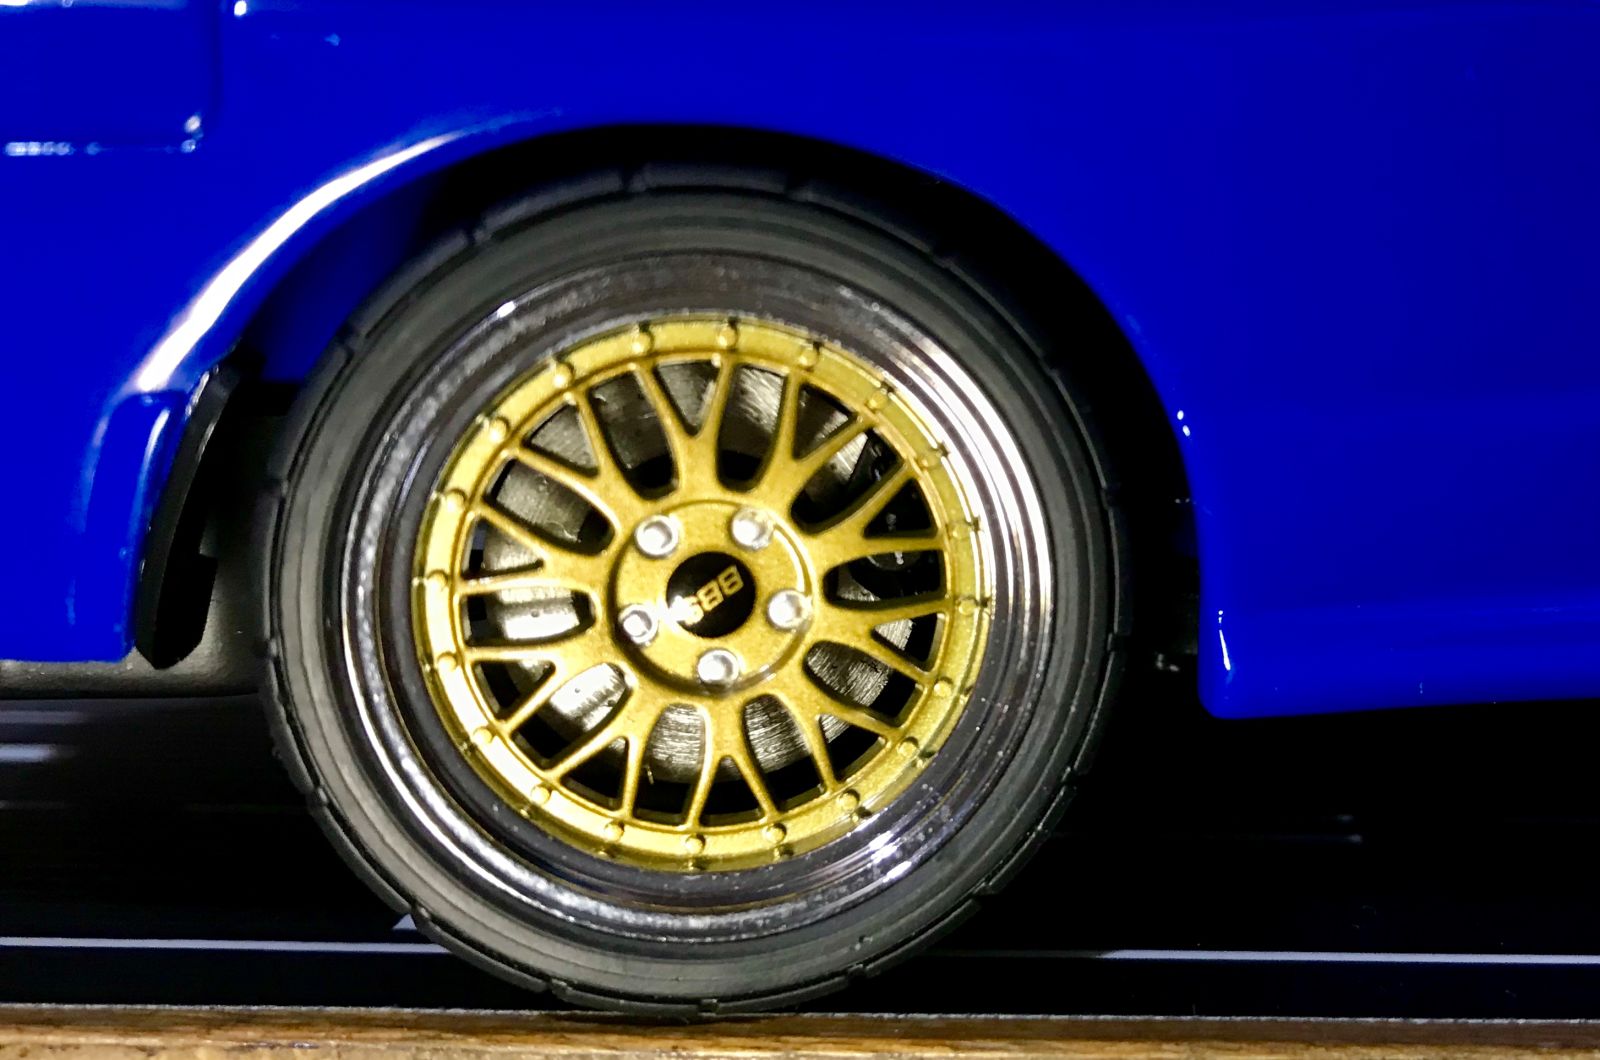 BBS Mesh wheels and gold finish is a winning combo in my book. The rear brake disks spin with the wheels, while the single-piston Brembo calipers stay in place. A cool touch!